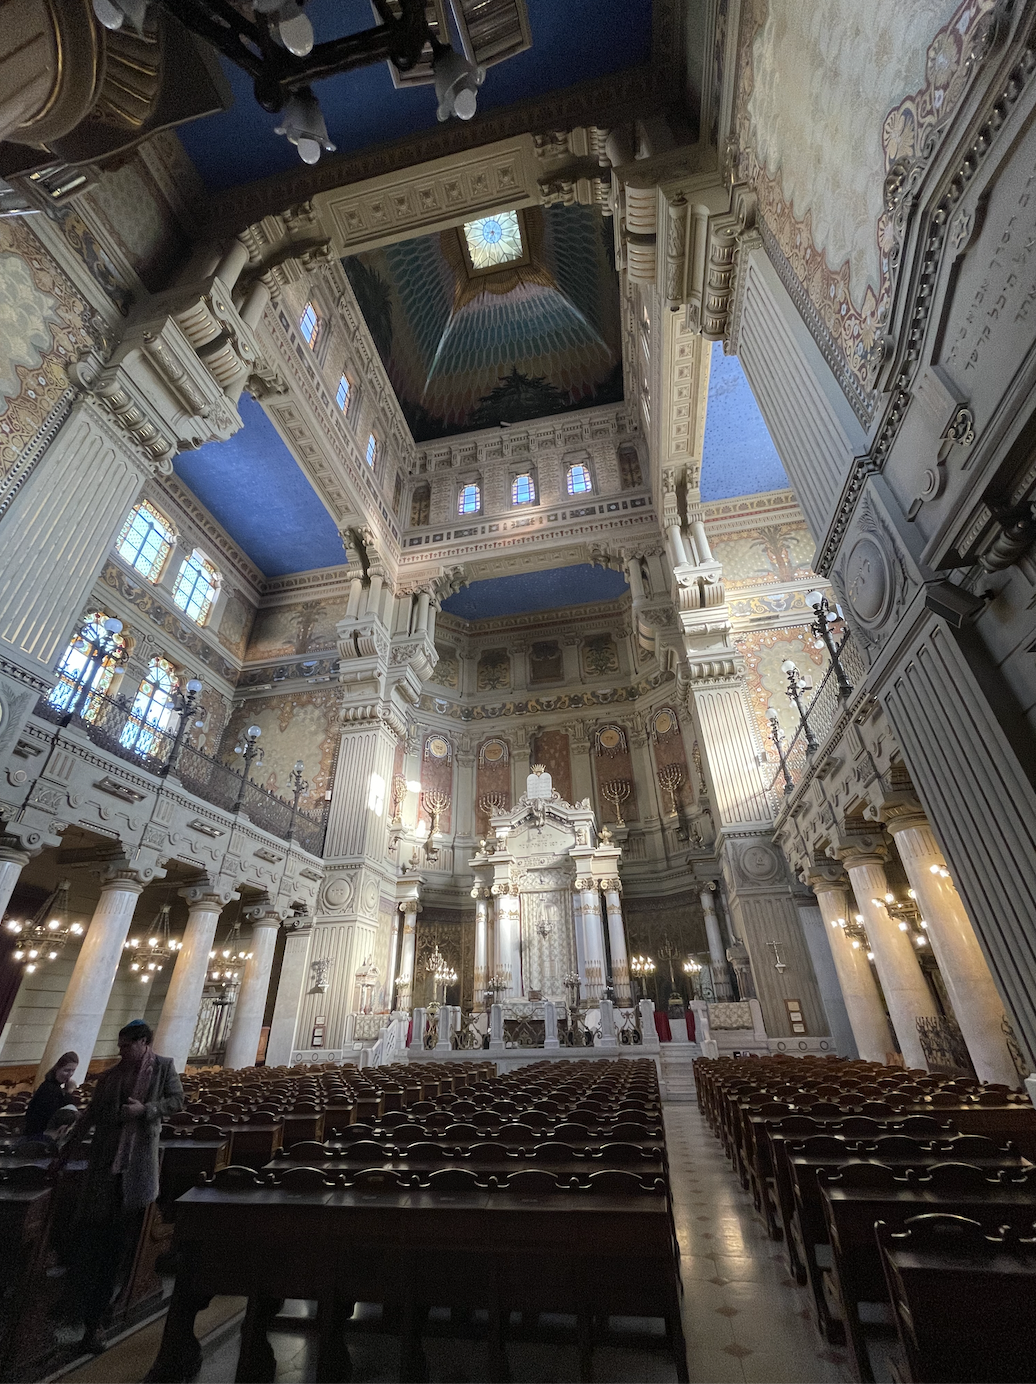 The Great Synagogue of Rome is known for being one of the largest synagogues in the world and an important symbol of the Jewish community in Rome